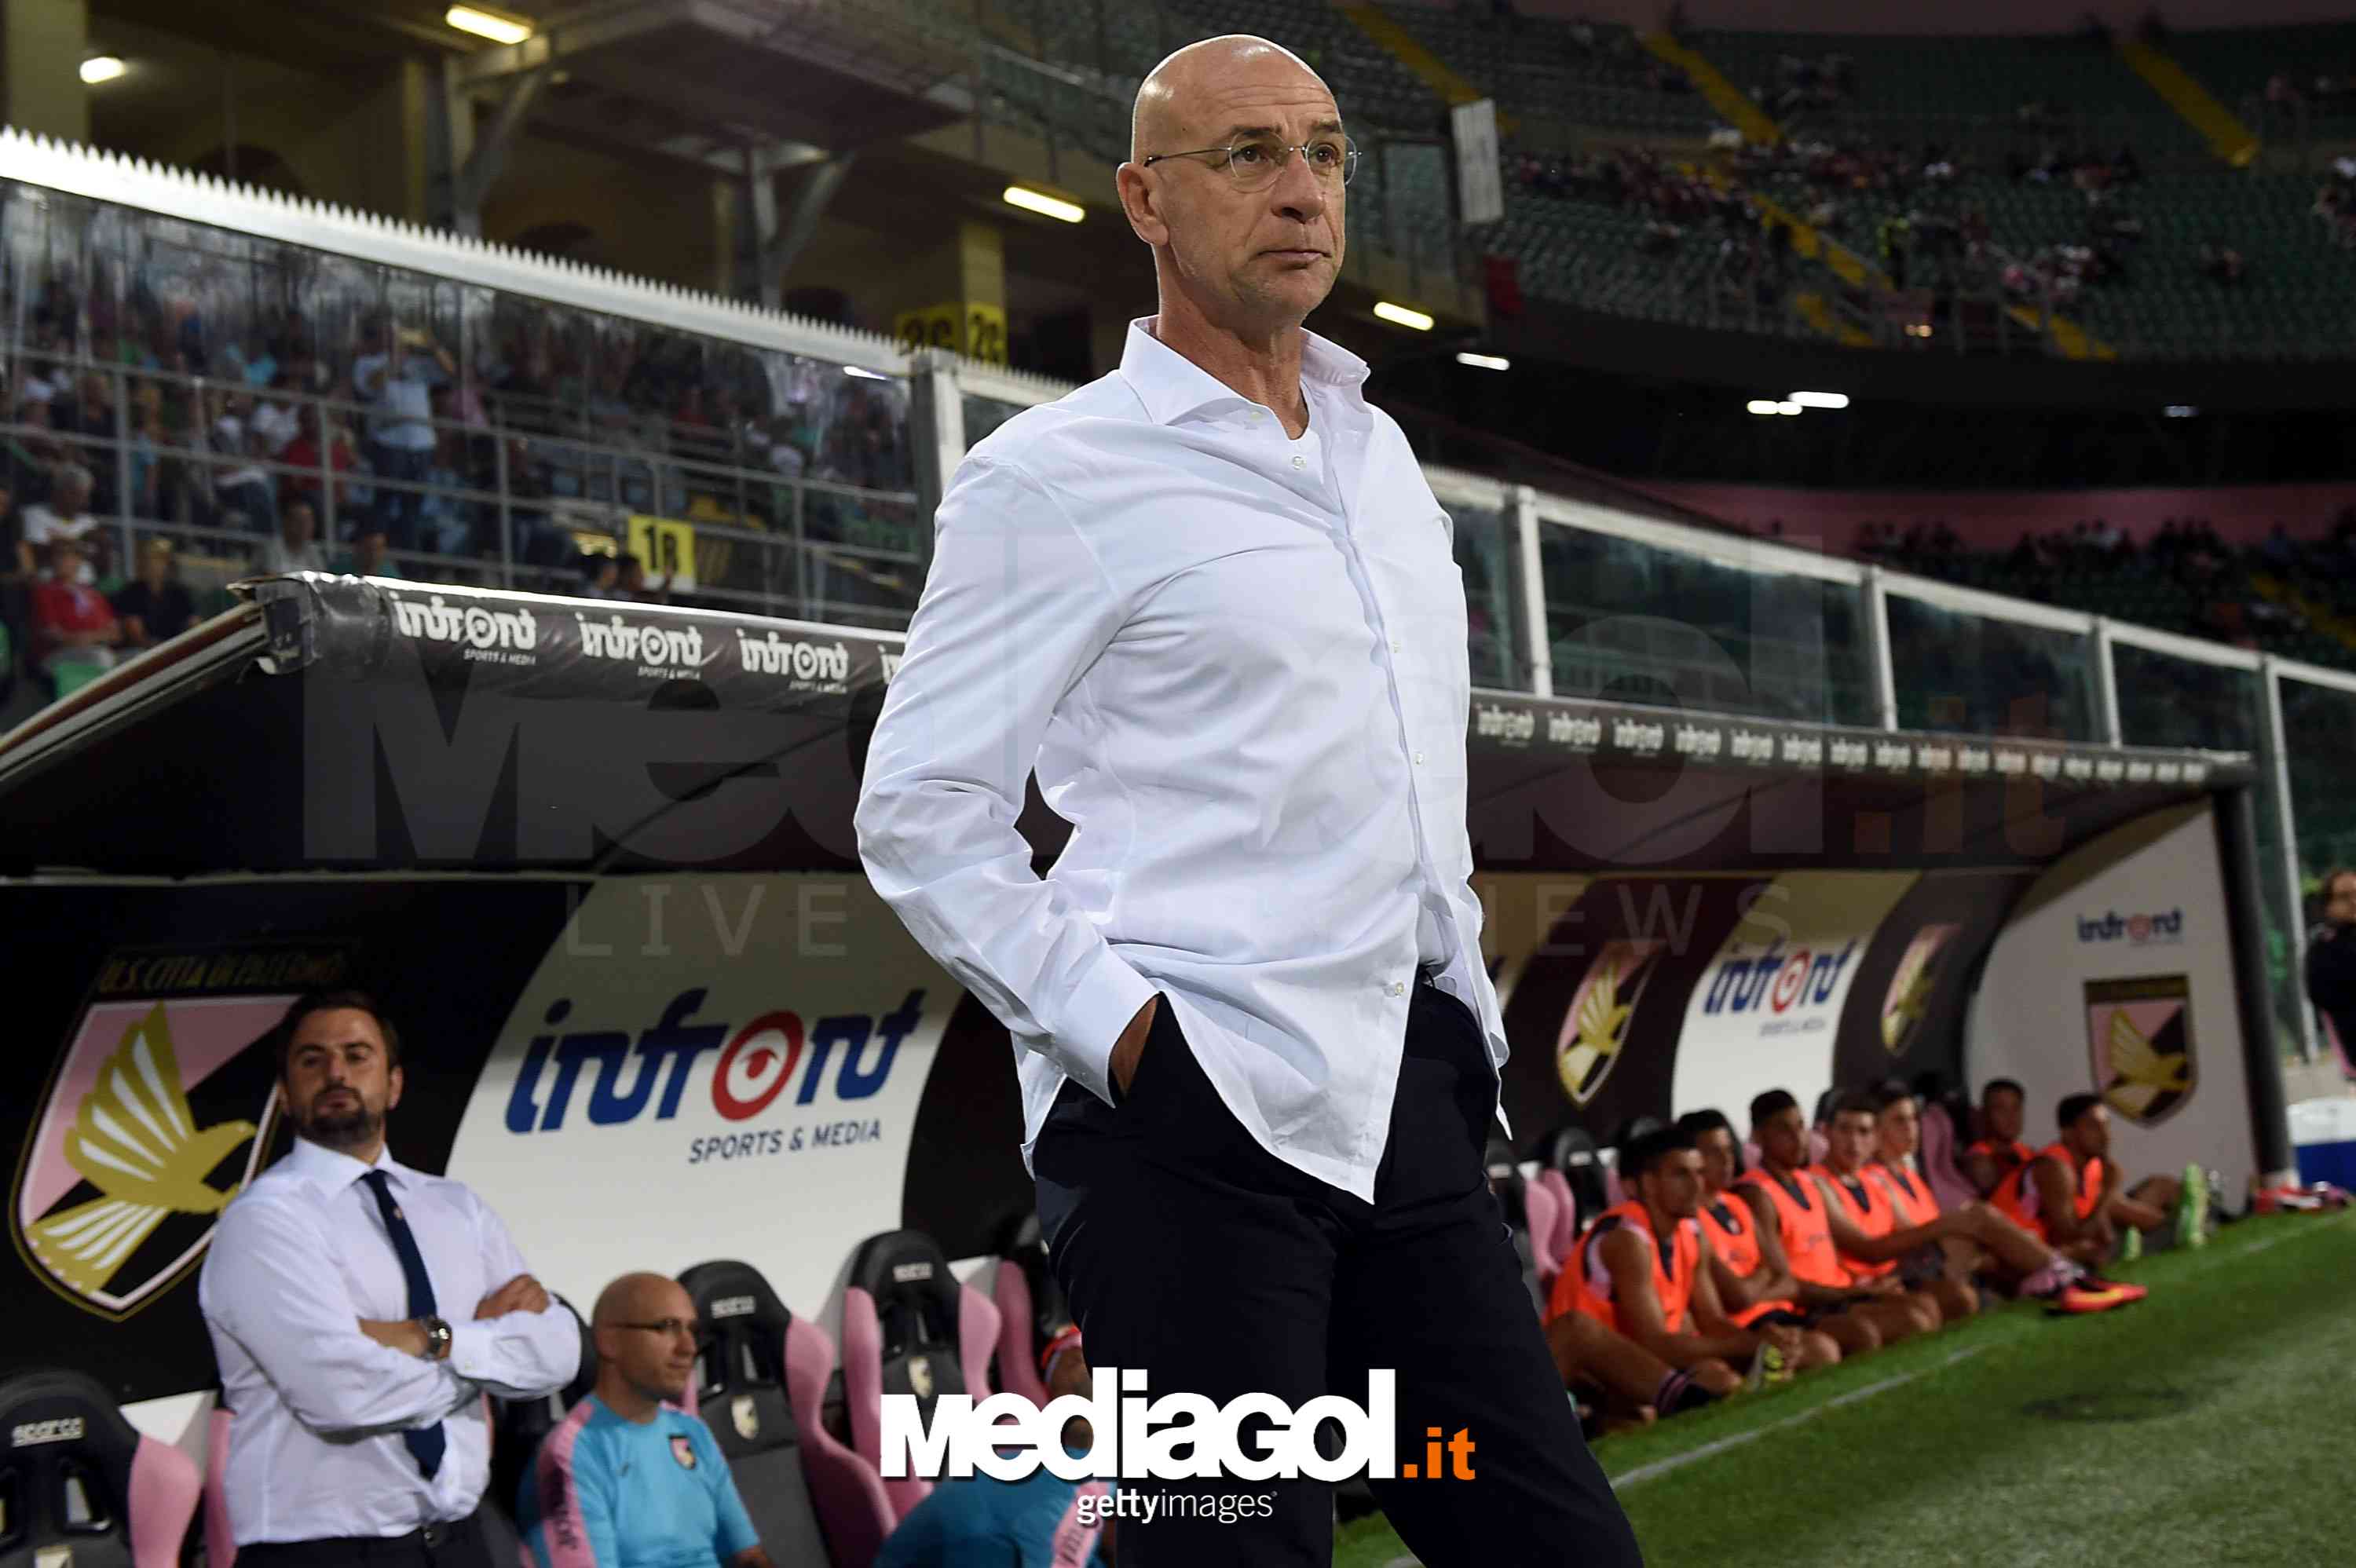 PALERMO, ITALY - AUGUST 06:  Head coach Davide Ballardini of Palermo looks on during the friendly match between US Citta' di Palermo and Olympique Marseille at Renzo Barbera Stadium on August 6, 2016 in Palermo, Italy.  (Photo by Tullio M. Puglia/Getty Images)